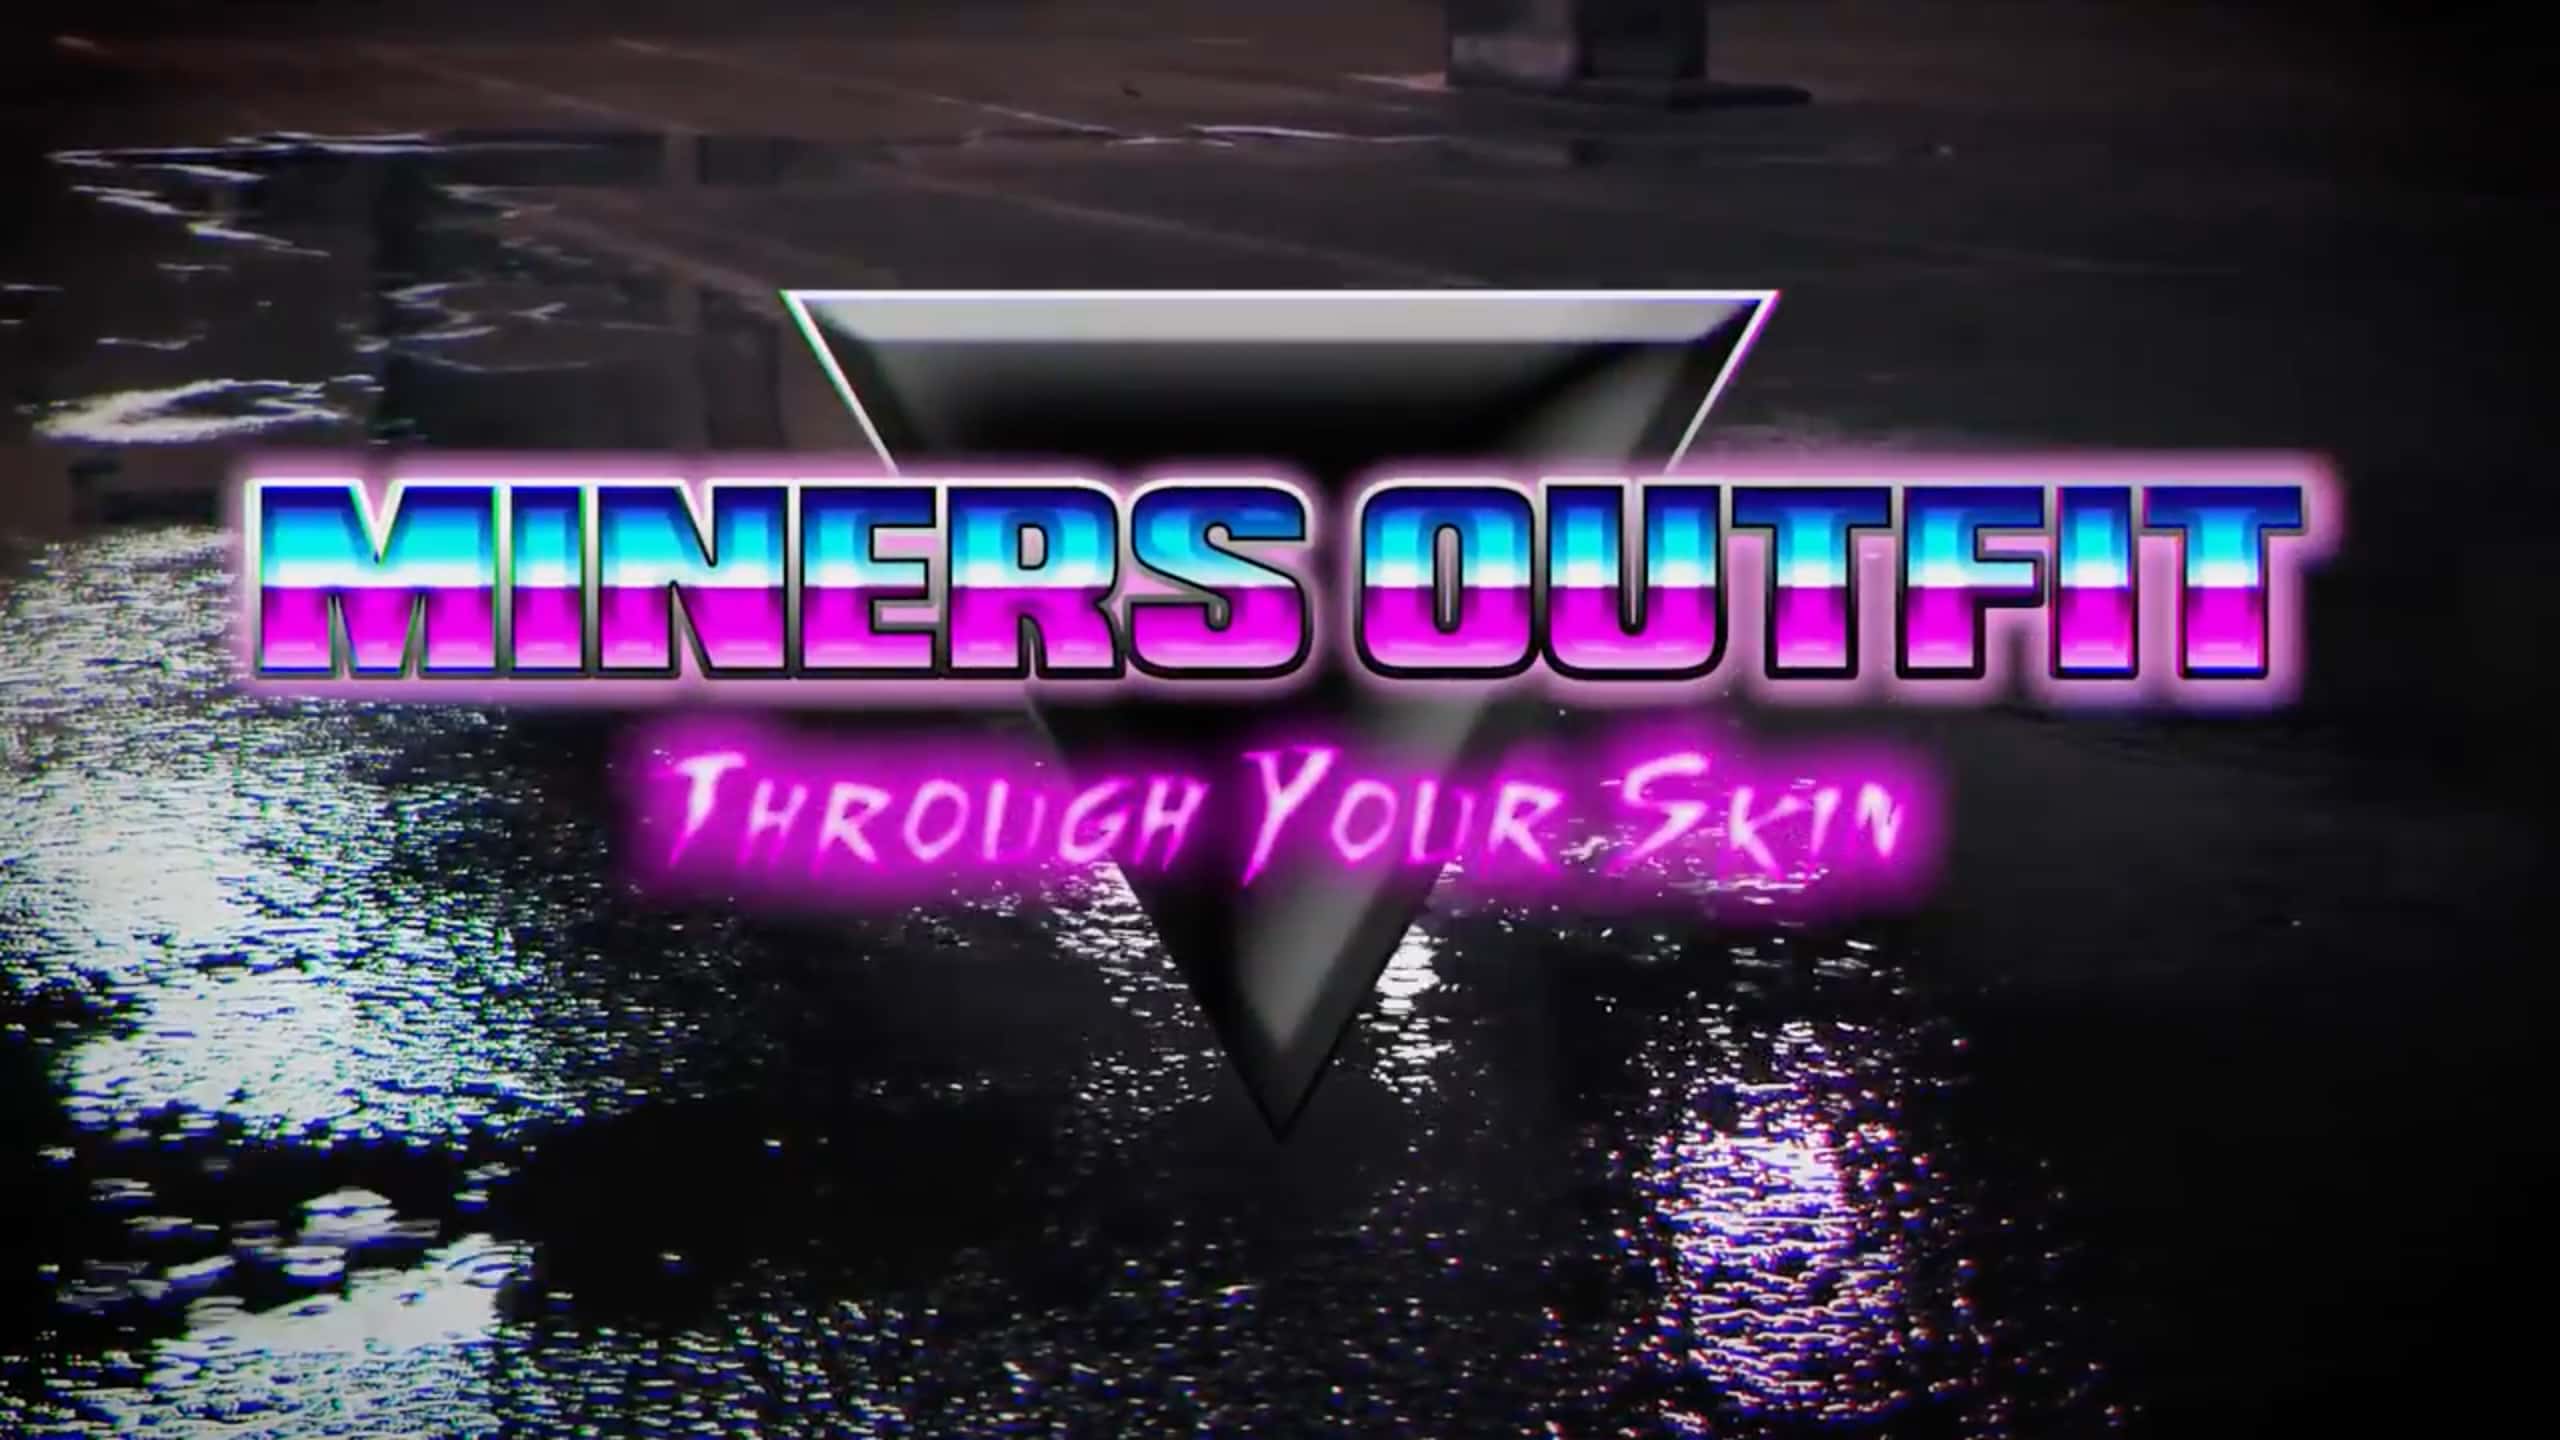 Music video For “Through Your Skin” by Miners Outfit